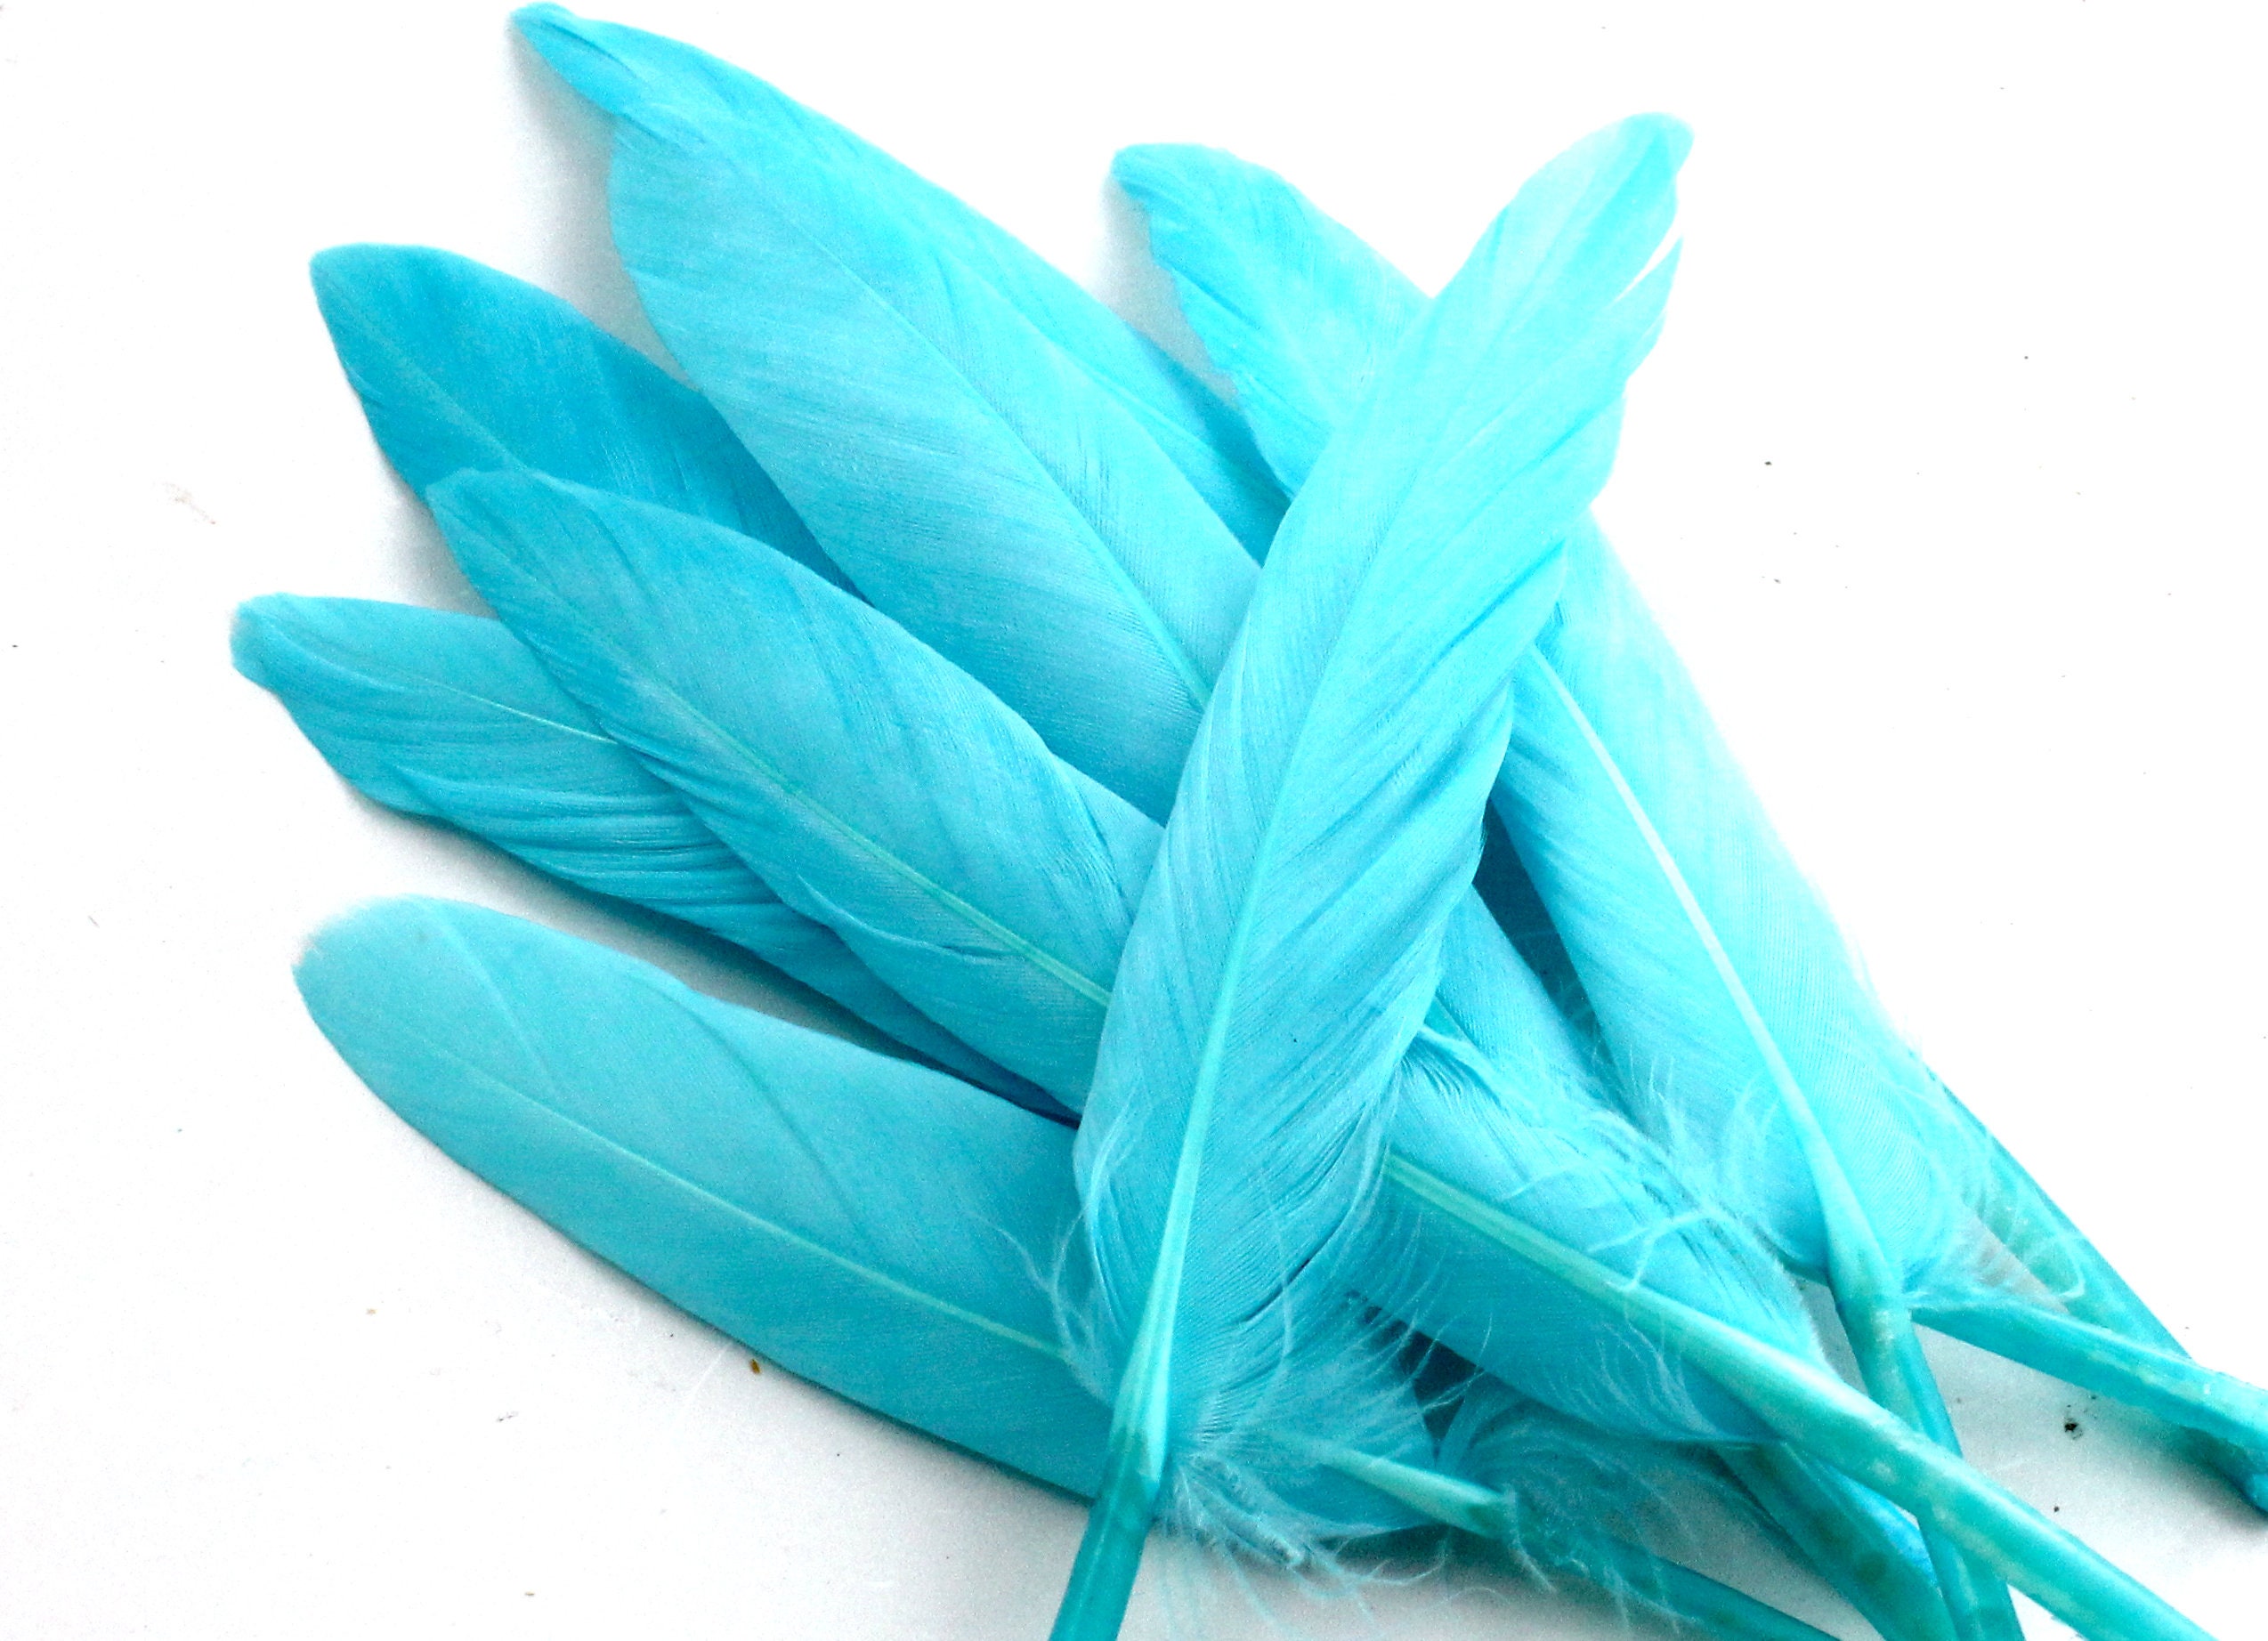 5-7 Inch Blue Goose Feathers. 10 Blue Bird Feathers. Stiff Feathers. Blue  Feathers for Crafts. Blue Fuzzy Feathers. Blue Mask Feathers. 